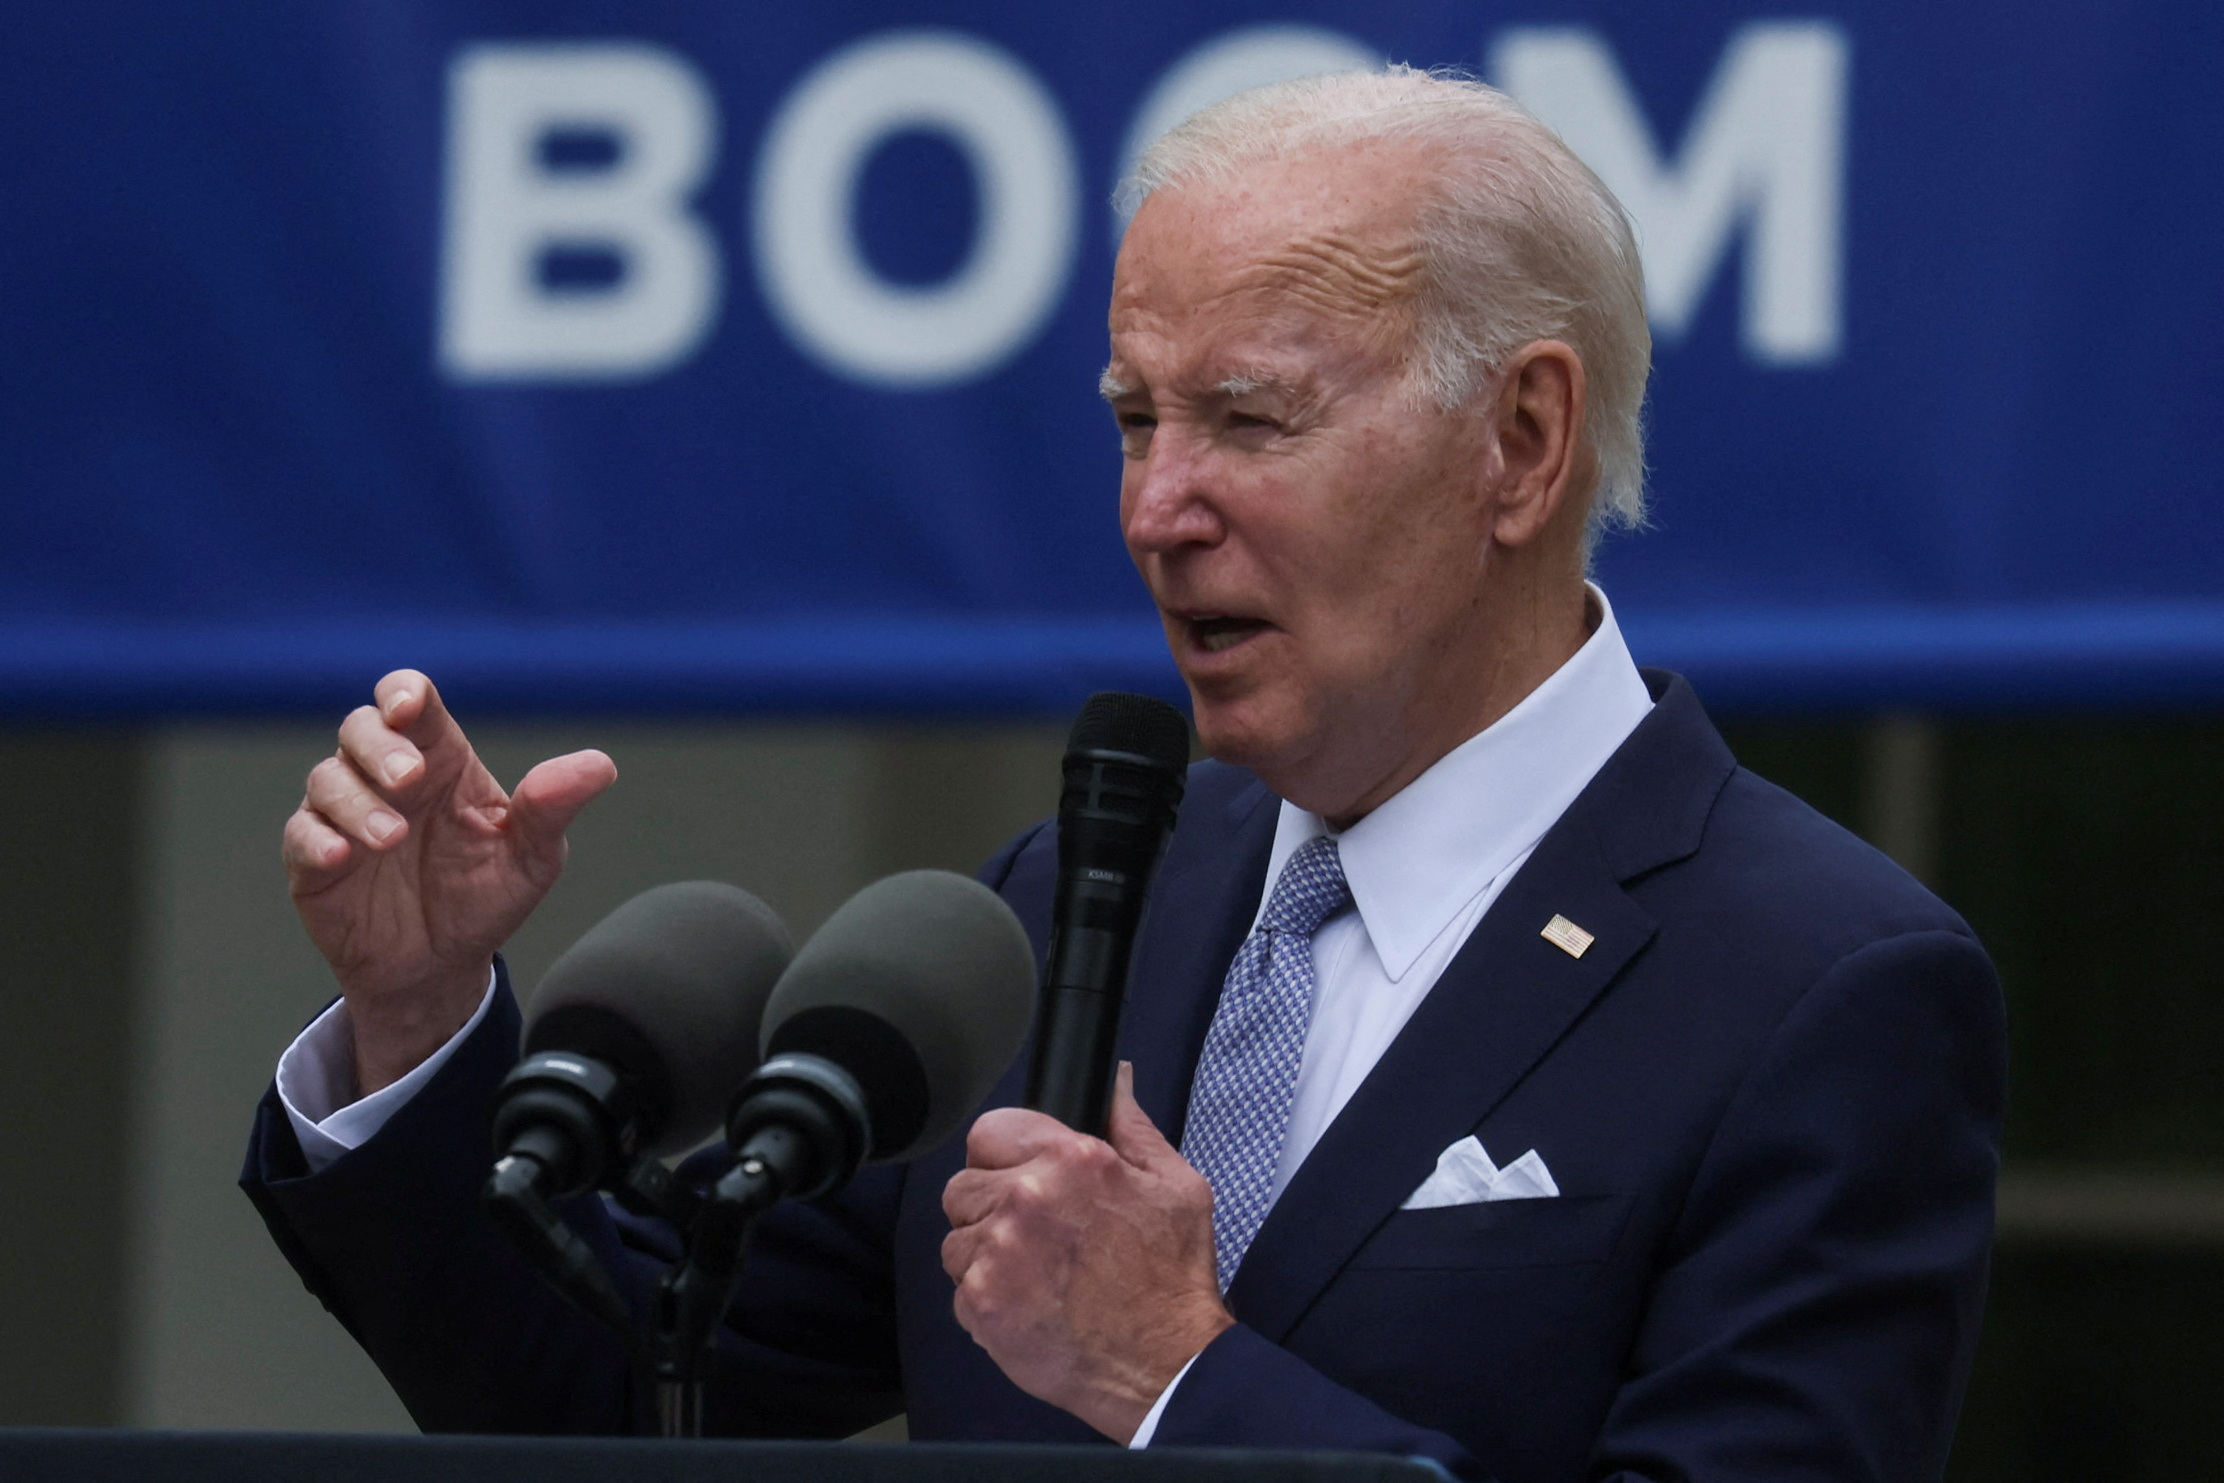 U.S. President Joe Biden holds event marking National Small Business Week at the White House in Washington